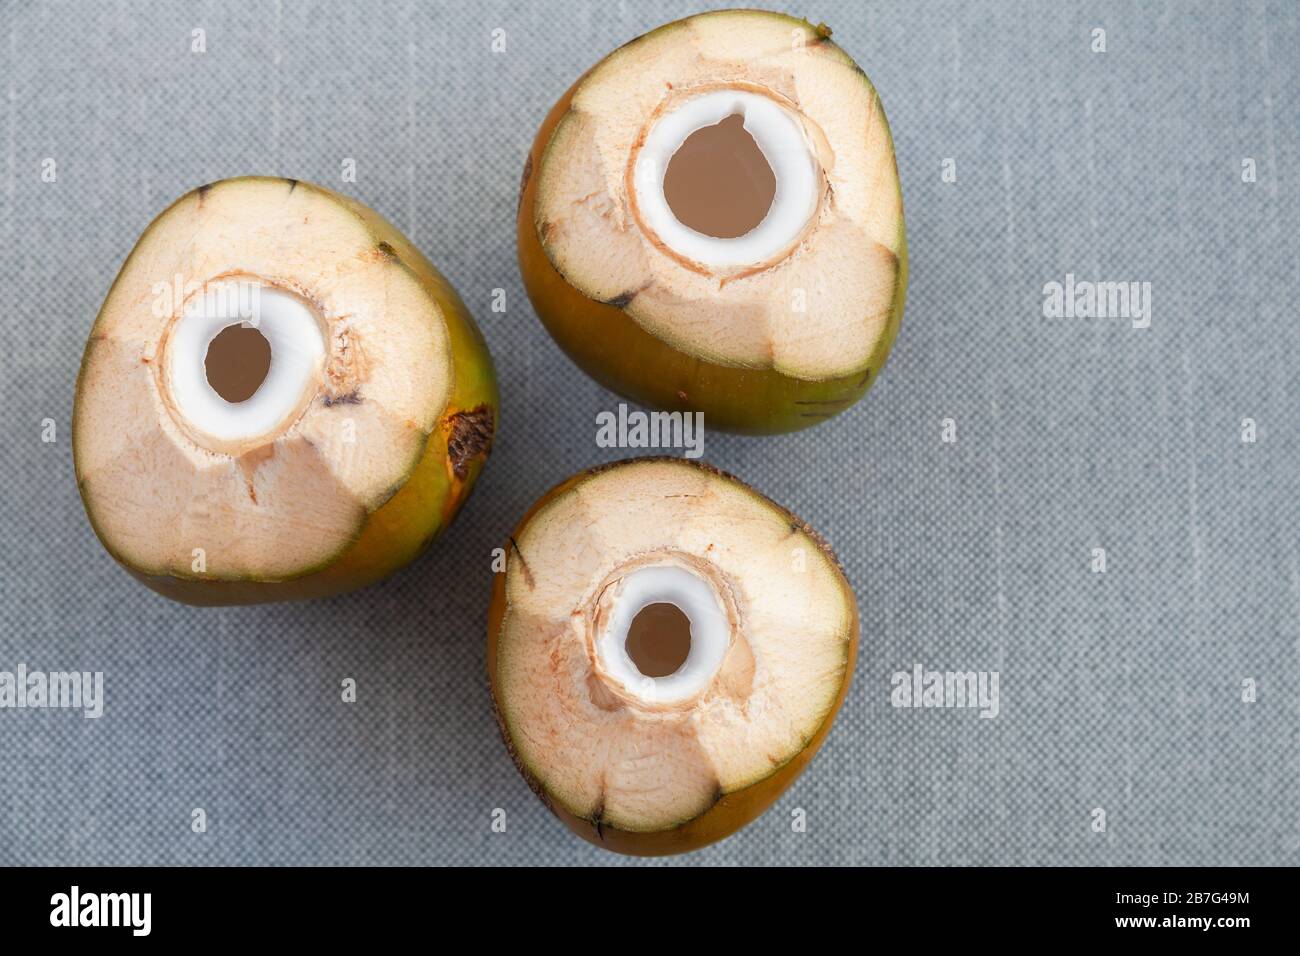 Three green coconuts with holes for straw stand on a gray surface, flat lay, top view photo Stock Photo